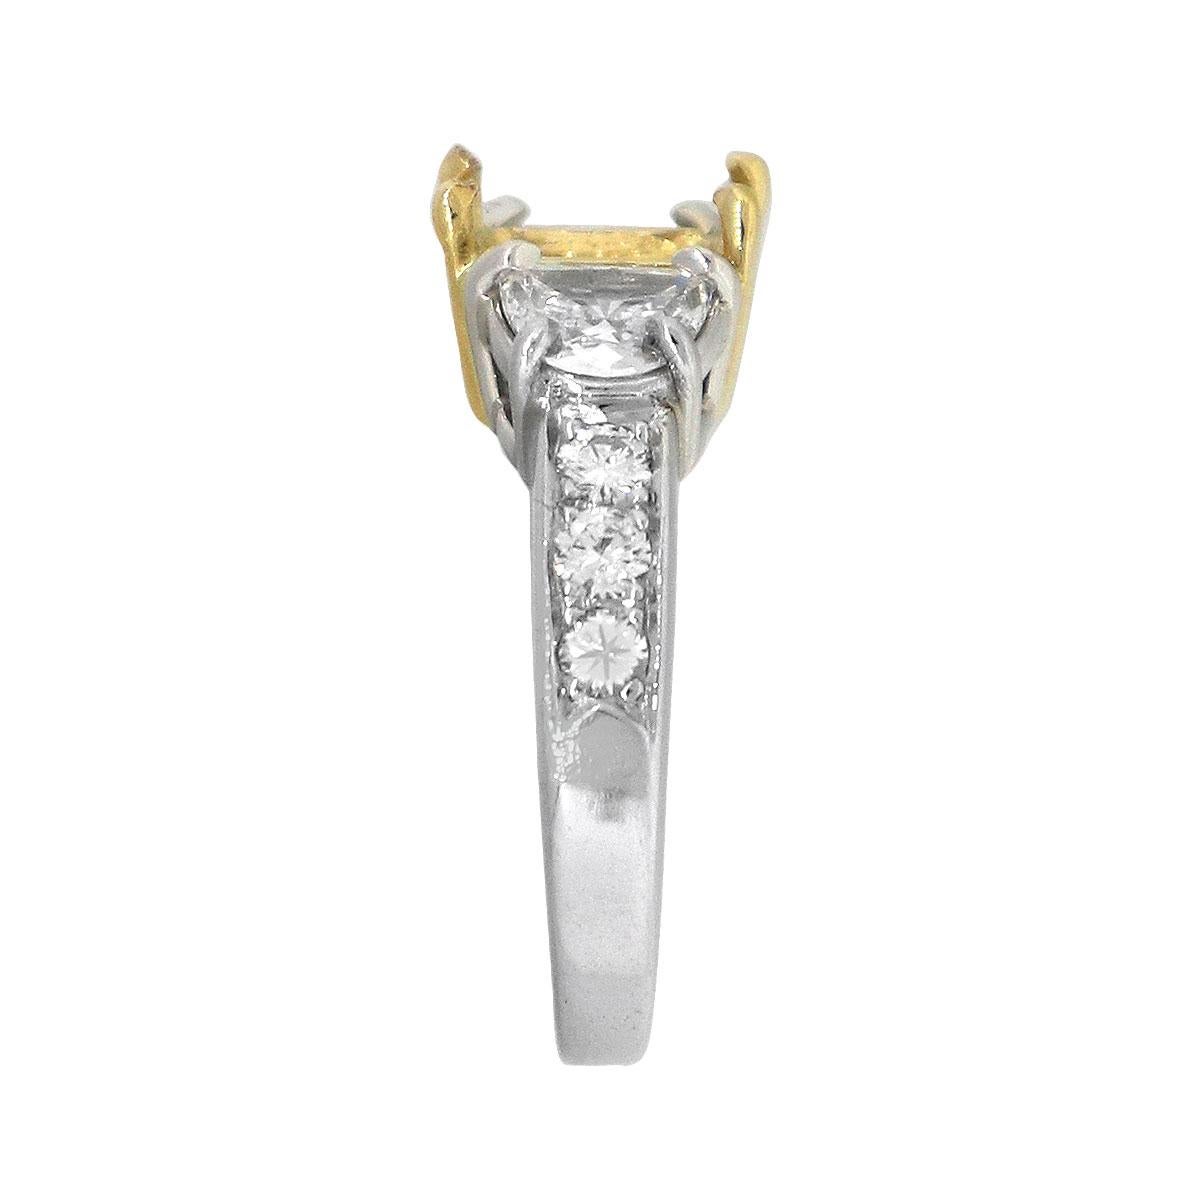 Material: Platinum & 18k Yellow gold
Diamond details: Approx. 1.5ctw of half moon stones. Diamonds are G/H in color and SI in clarity. Approx. 0.24ctw of round cut diamonds. Diamonds are G/H in color and VS in clarity
Mounting Details: Can